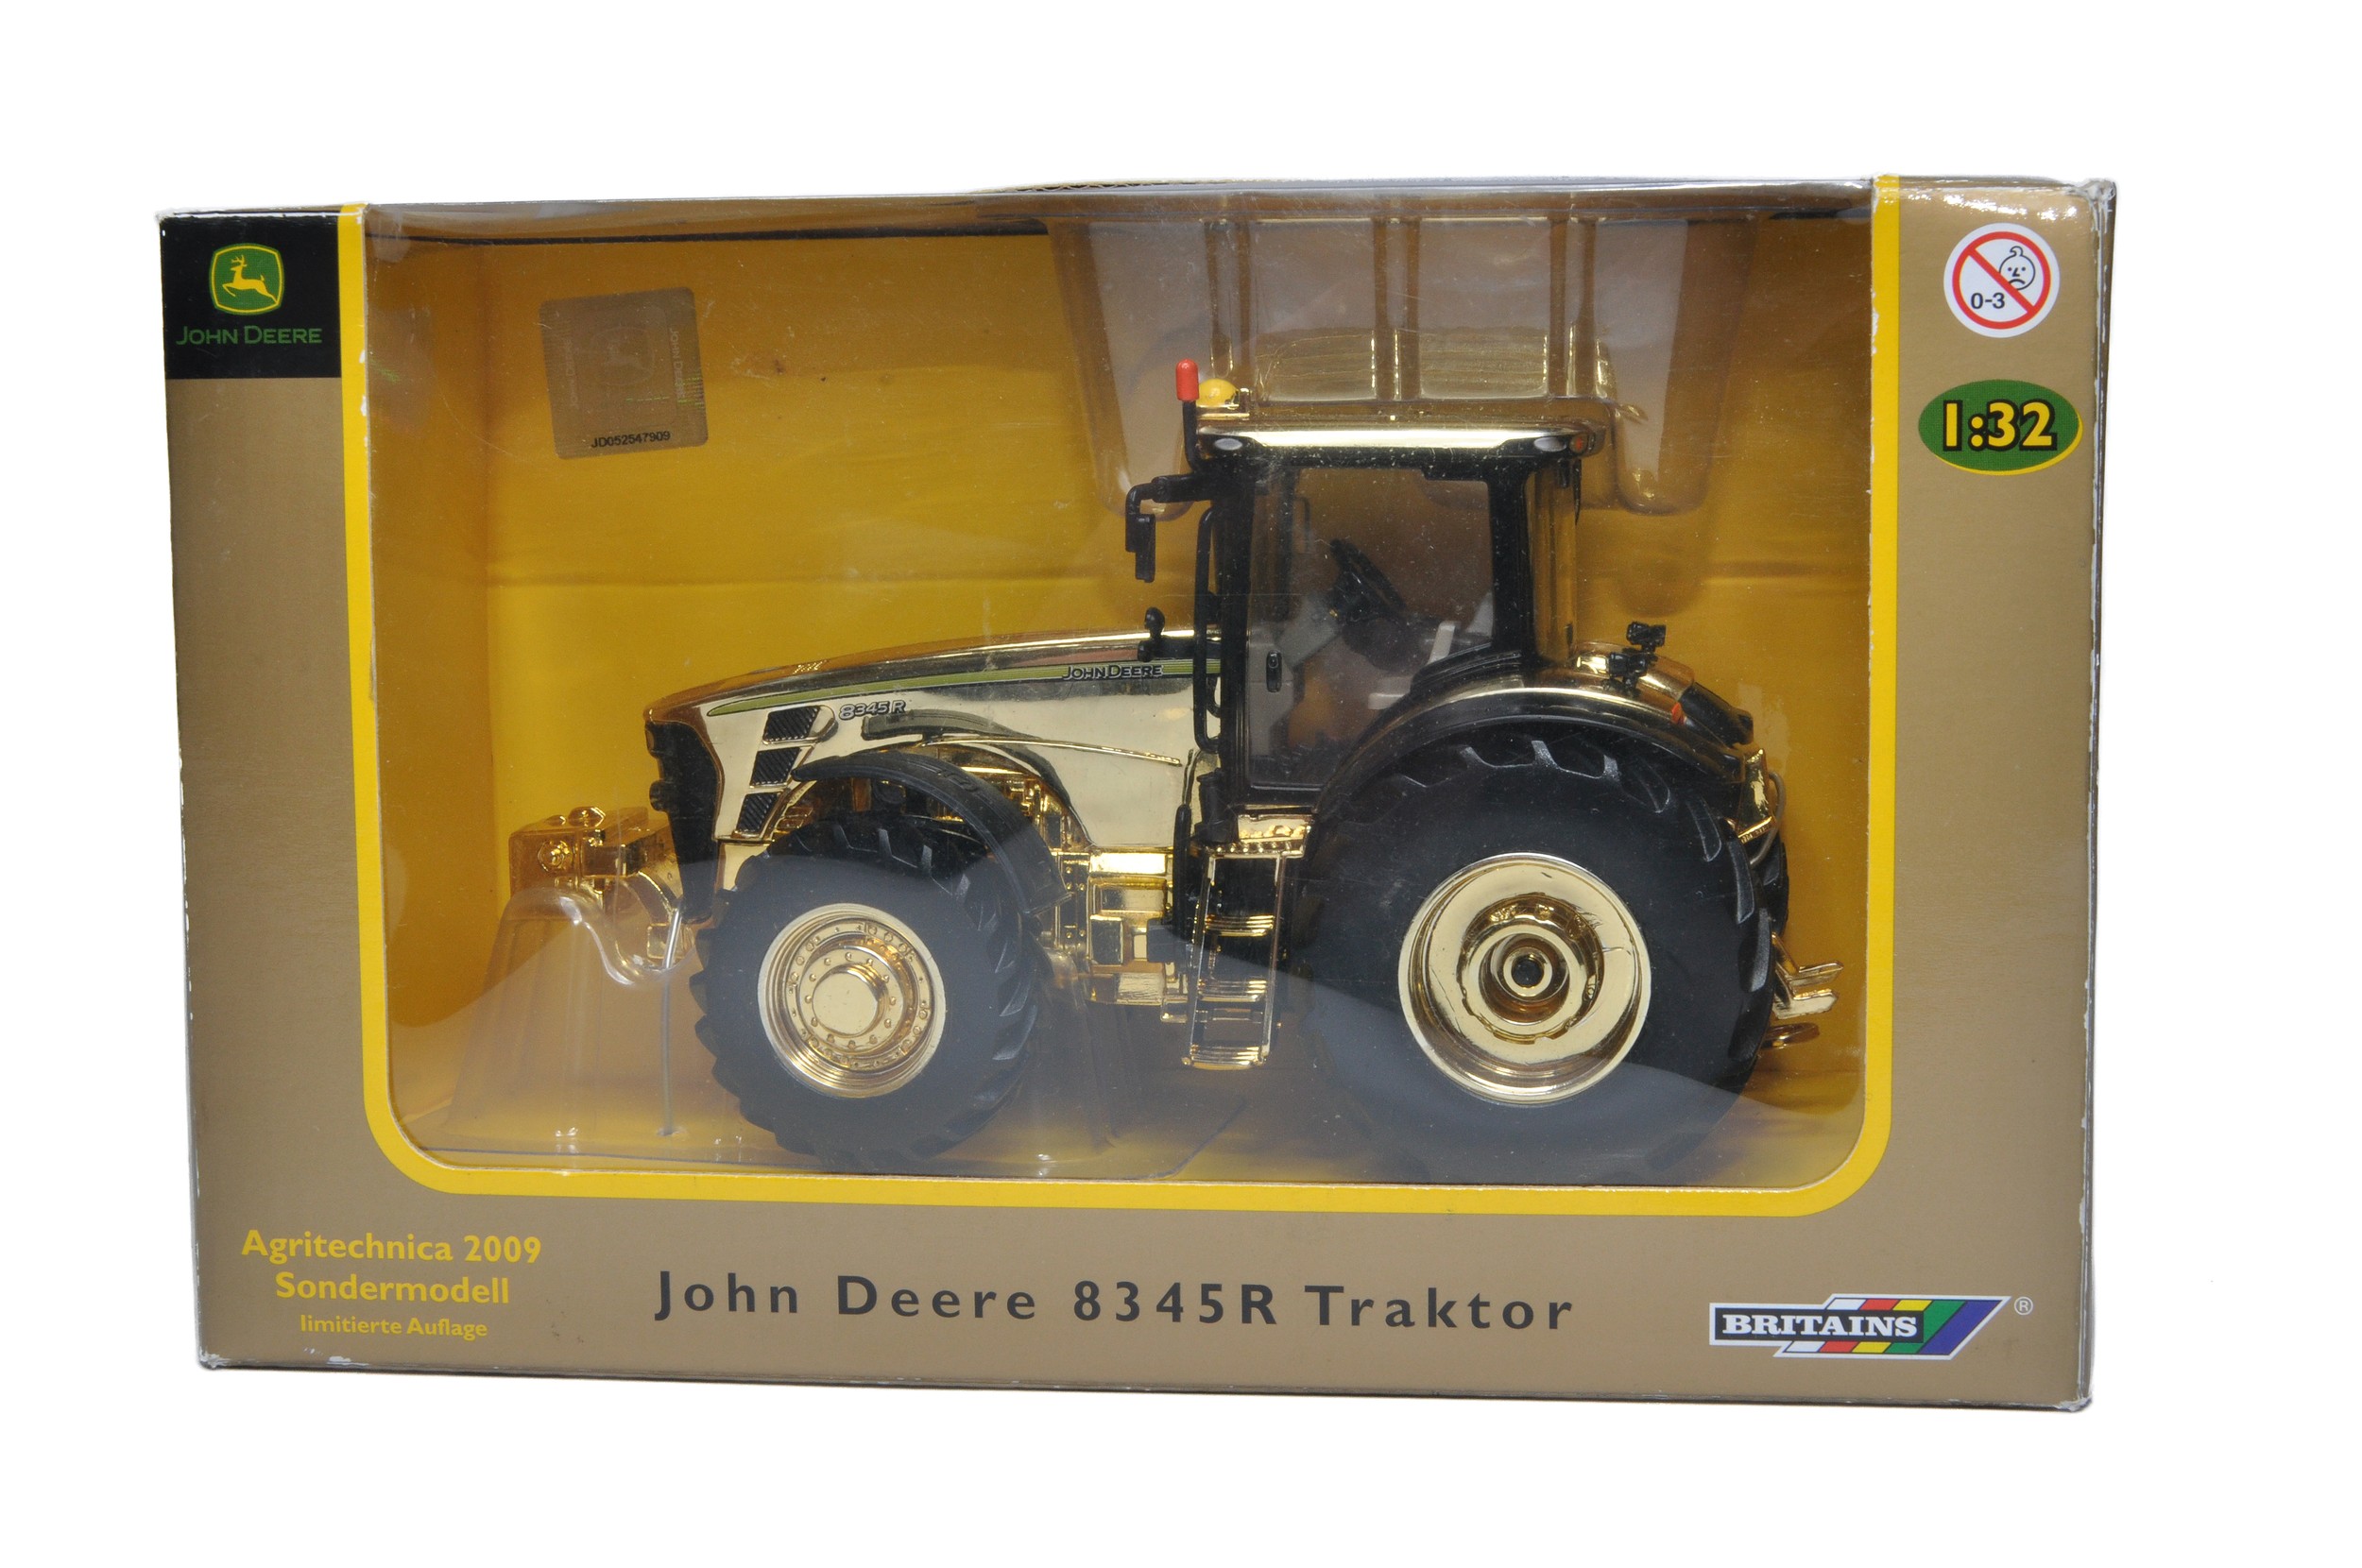 Britains Farm No. 42590 John Deere 8345R Tractor. Special Gold Edition for Agritechnica 2009.